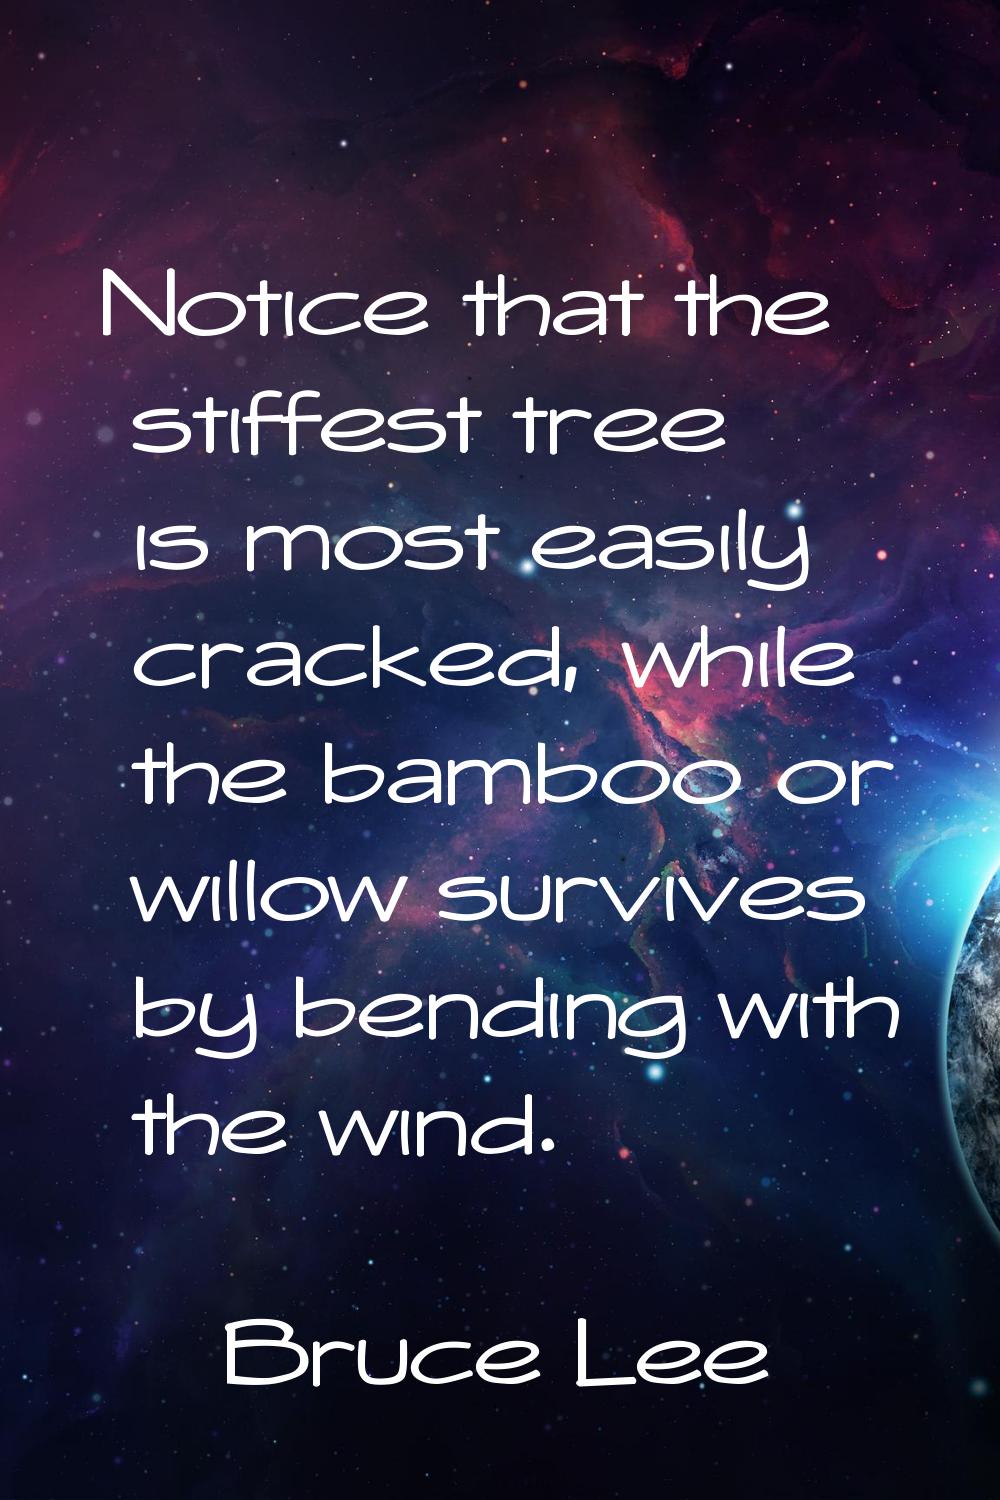 Notice that the stiffest tree is most easily cracked, while the bamboo or willow survives by bendin